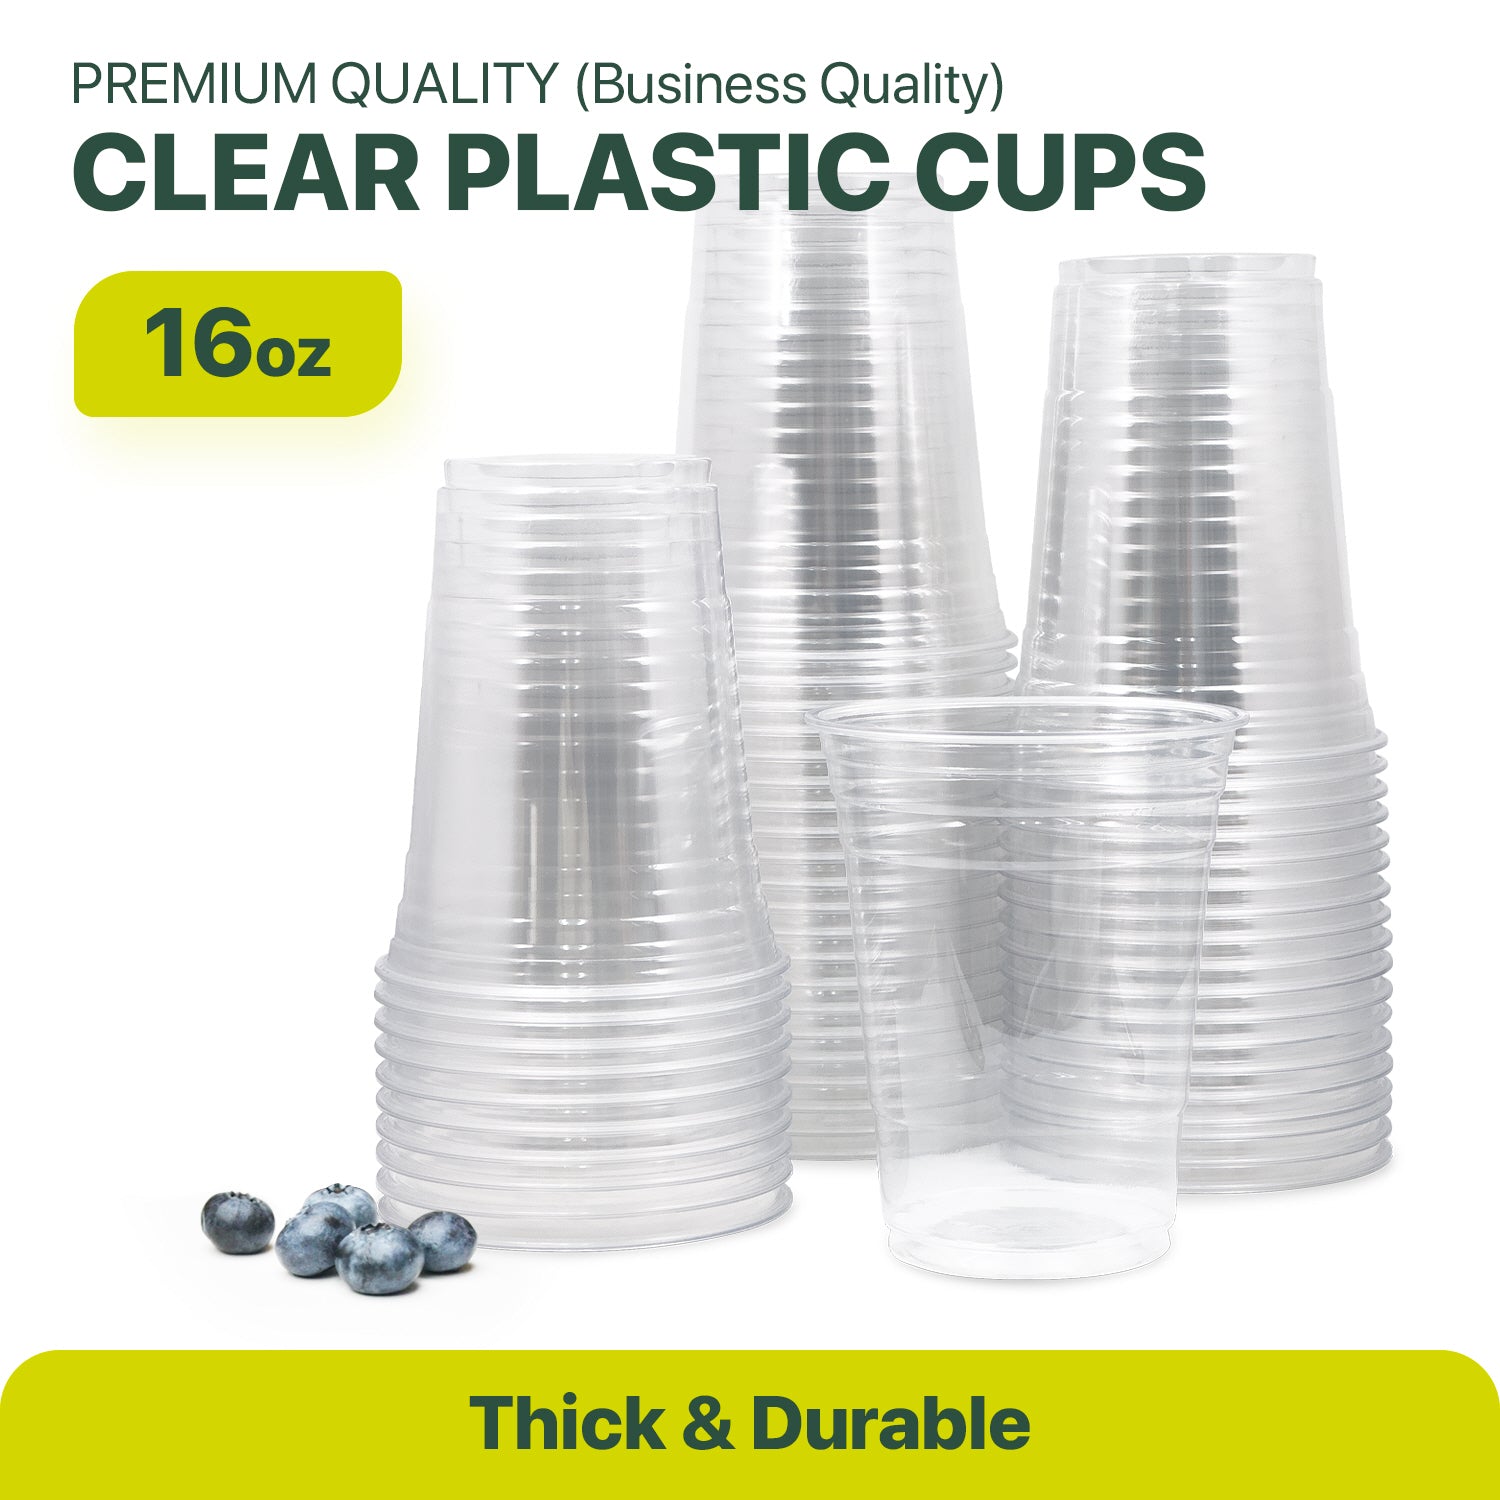 Plastic Cups - 16oz PET Cold Cups (98mm) - 1,000 ct, Coffee Shop Supplies, Carry Out Containers